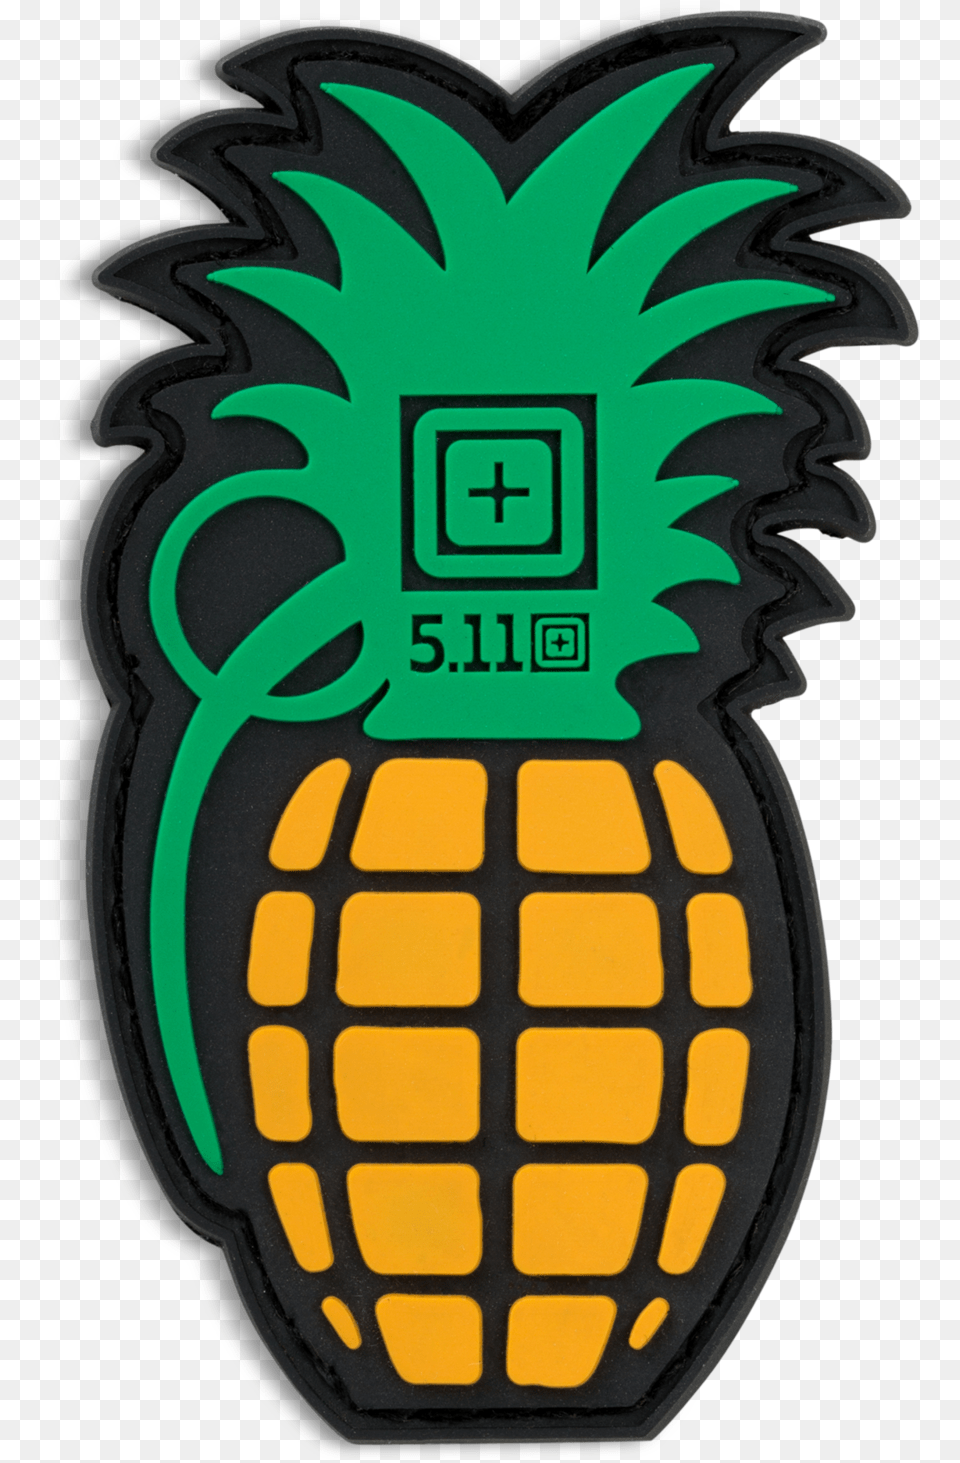 Pineapple Grenade Patch 511 Tactical Pineapple Grenade Patch, Produce, Plant, Food, Fruit Png Image